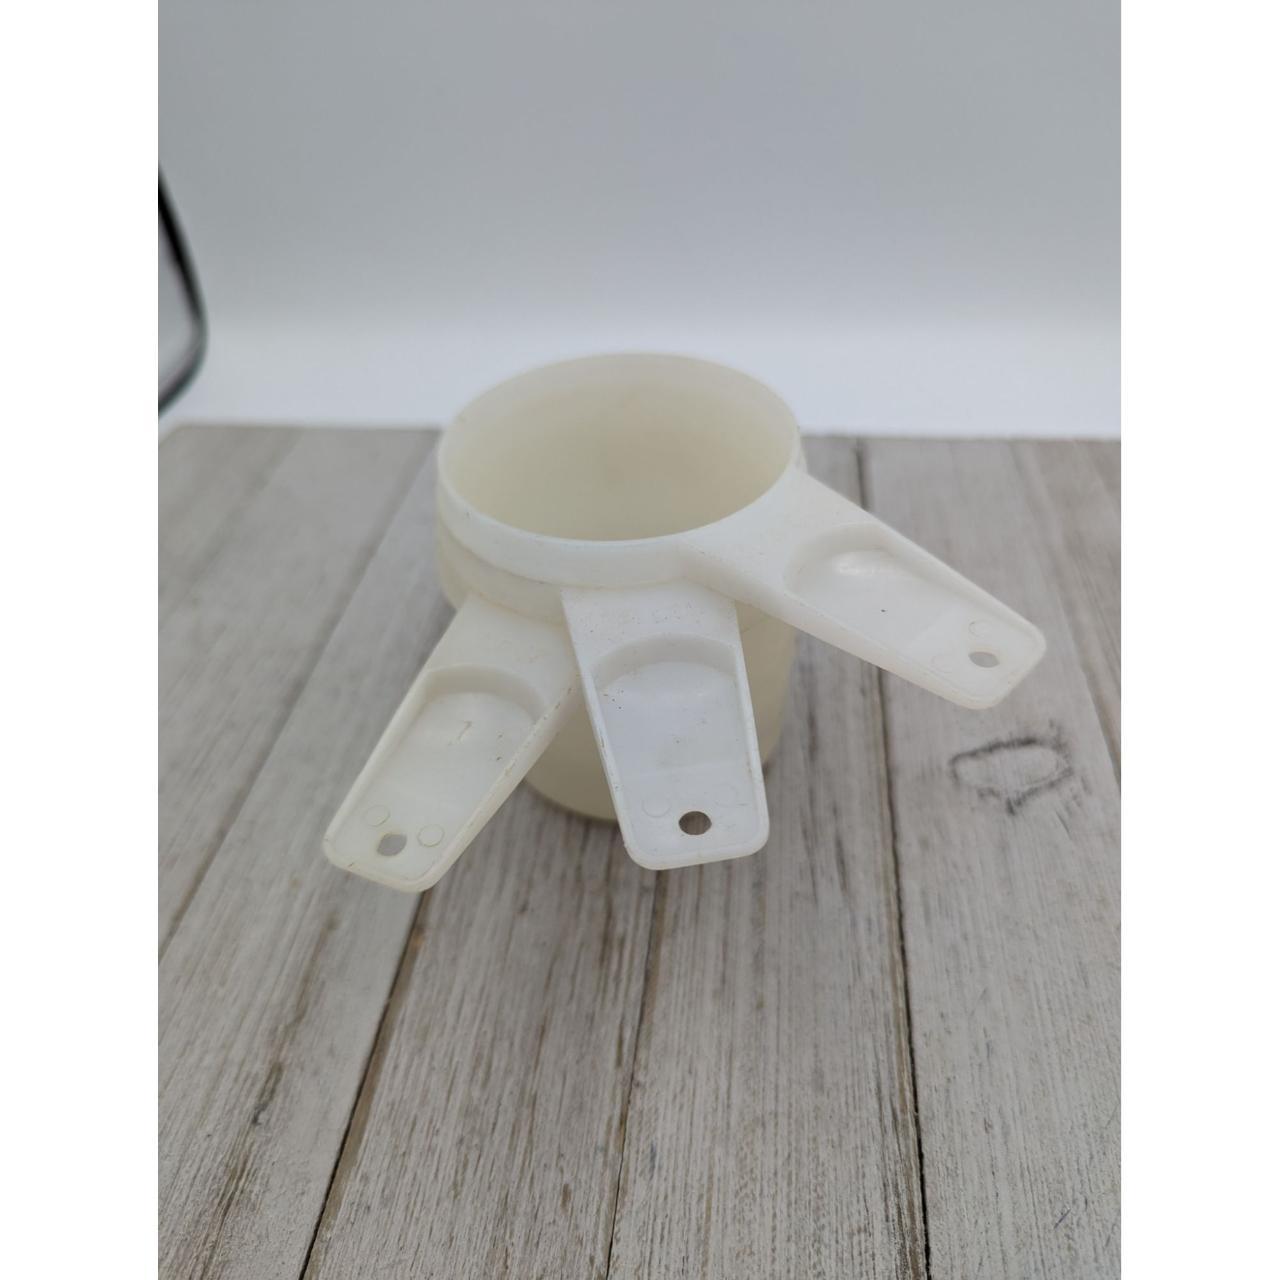 Features: • Tupperware Measuring Cups • White • 1 - Depop